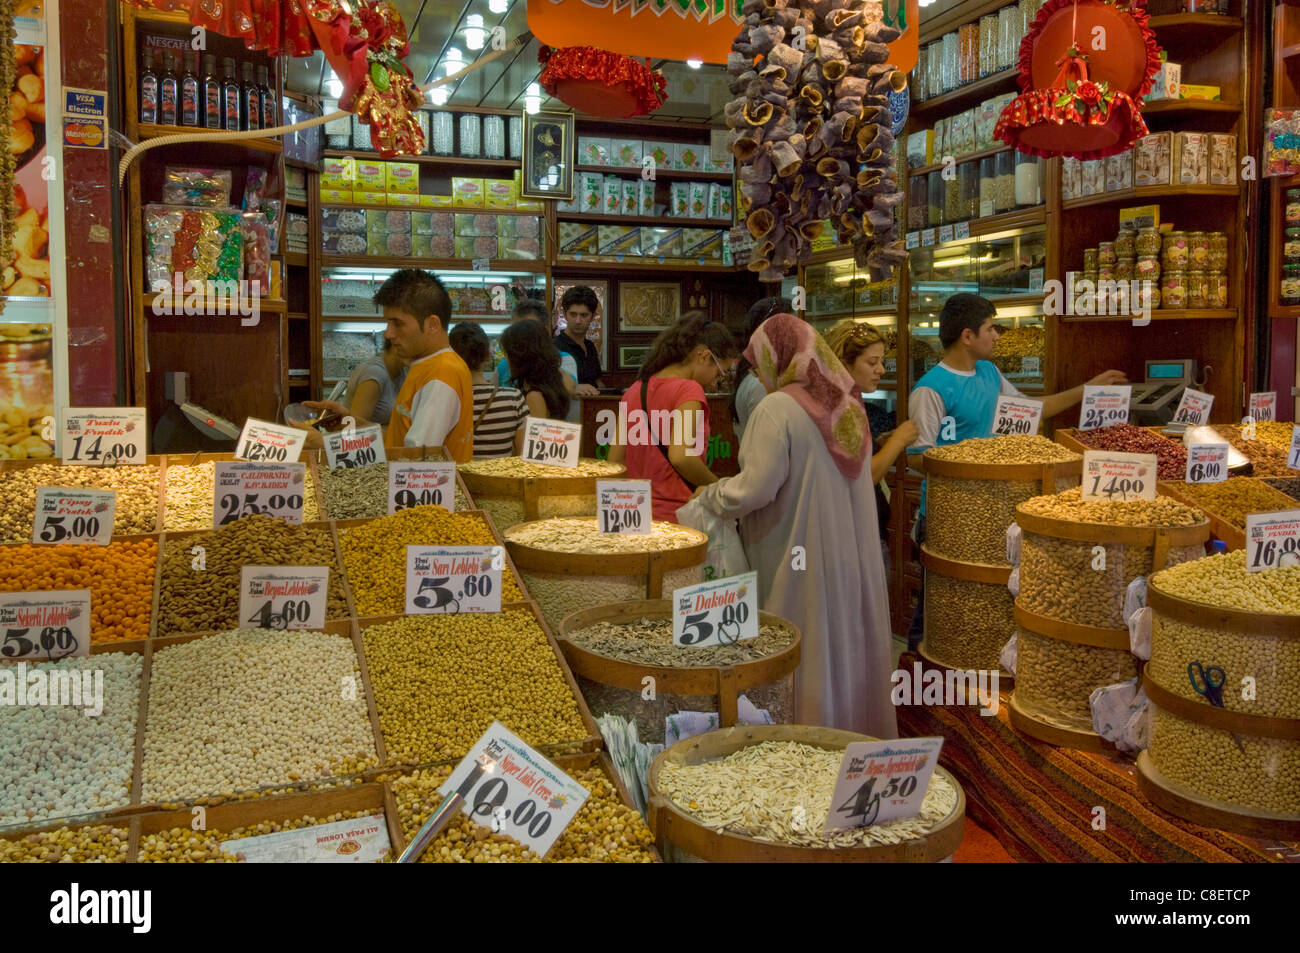 People buying pulses, nuts and spices at stall in the Egyptian bazaar (Spice bazaar) (Misir Carsisi, Eminonu, Istanbul, Turkey Stock Photo